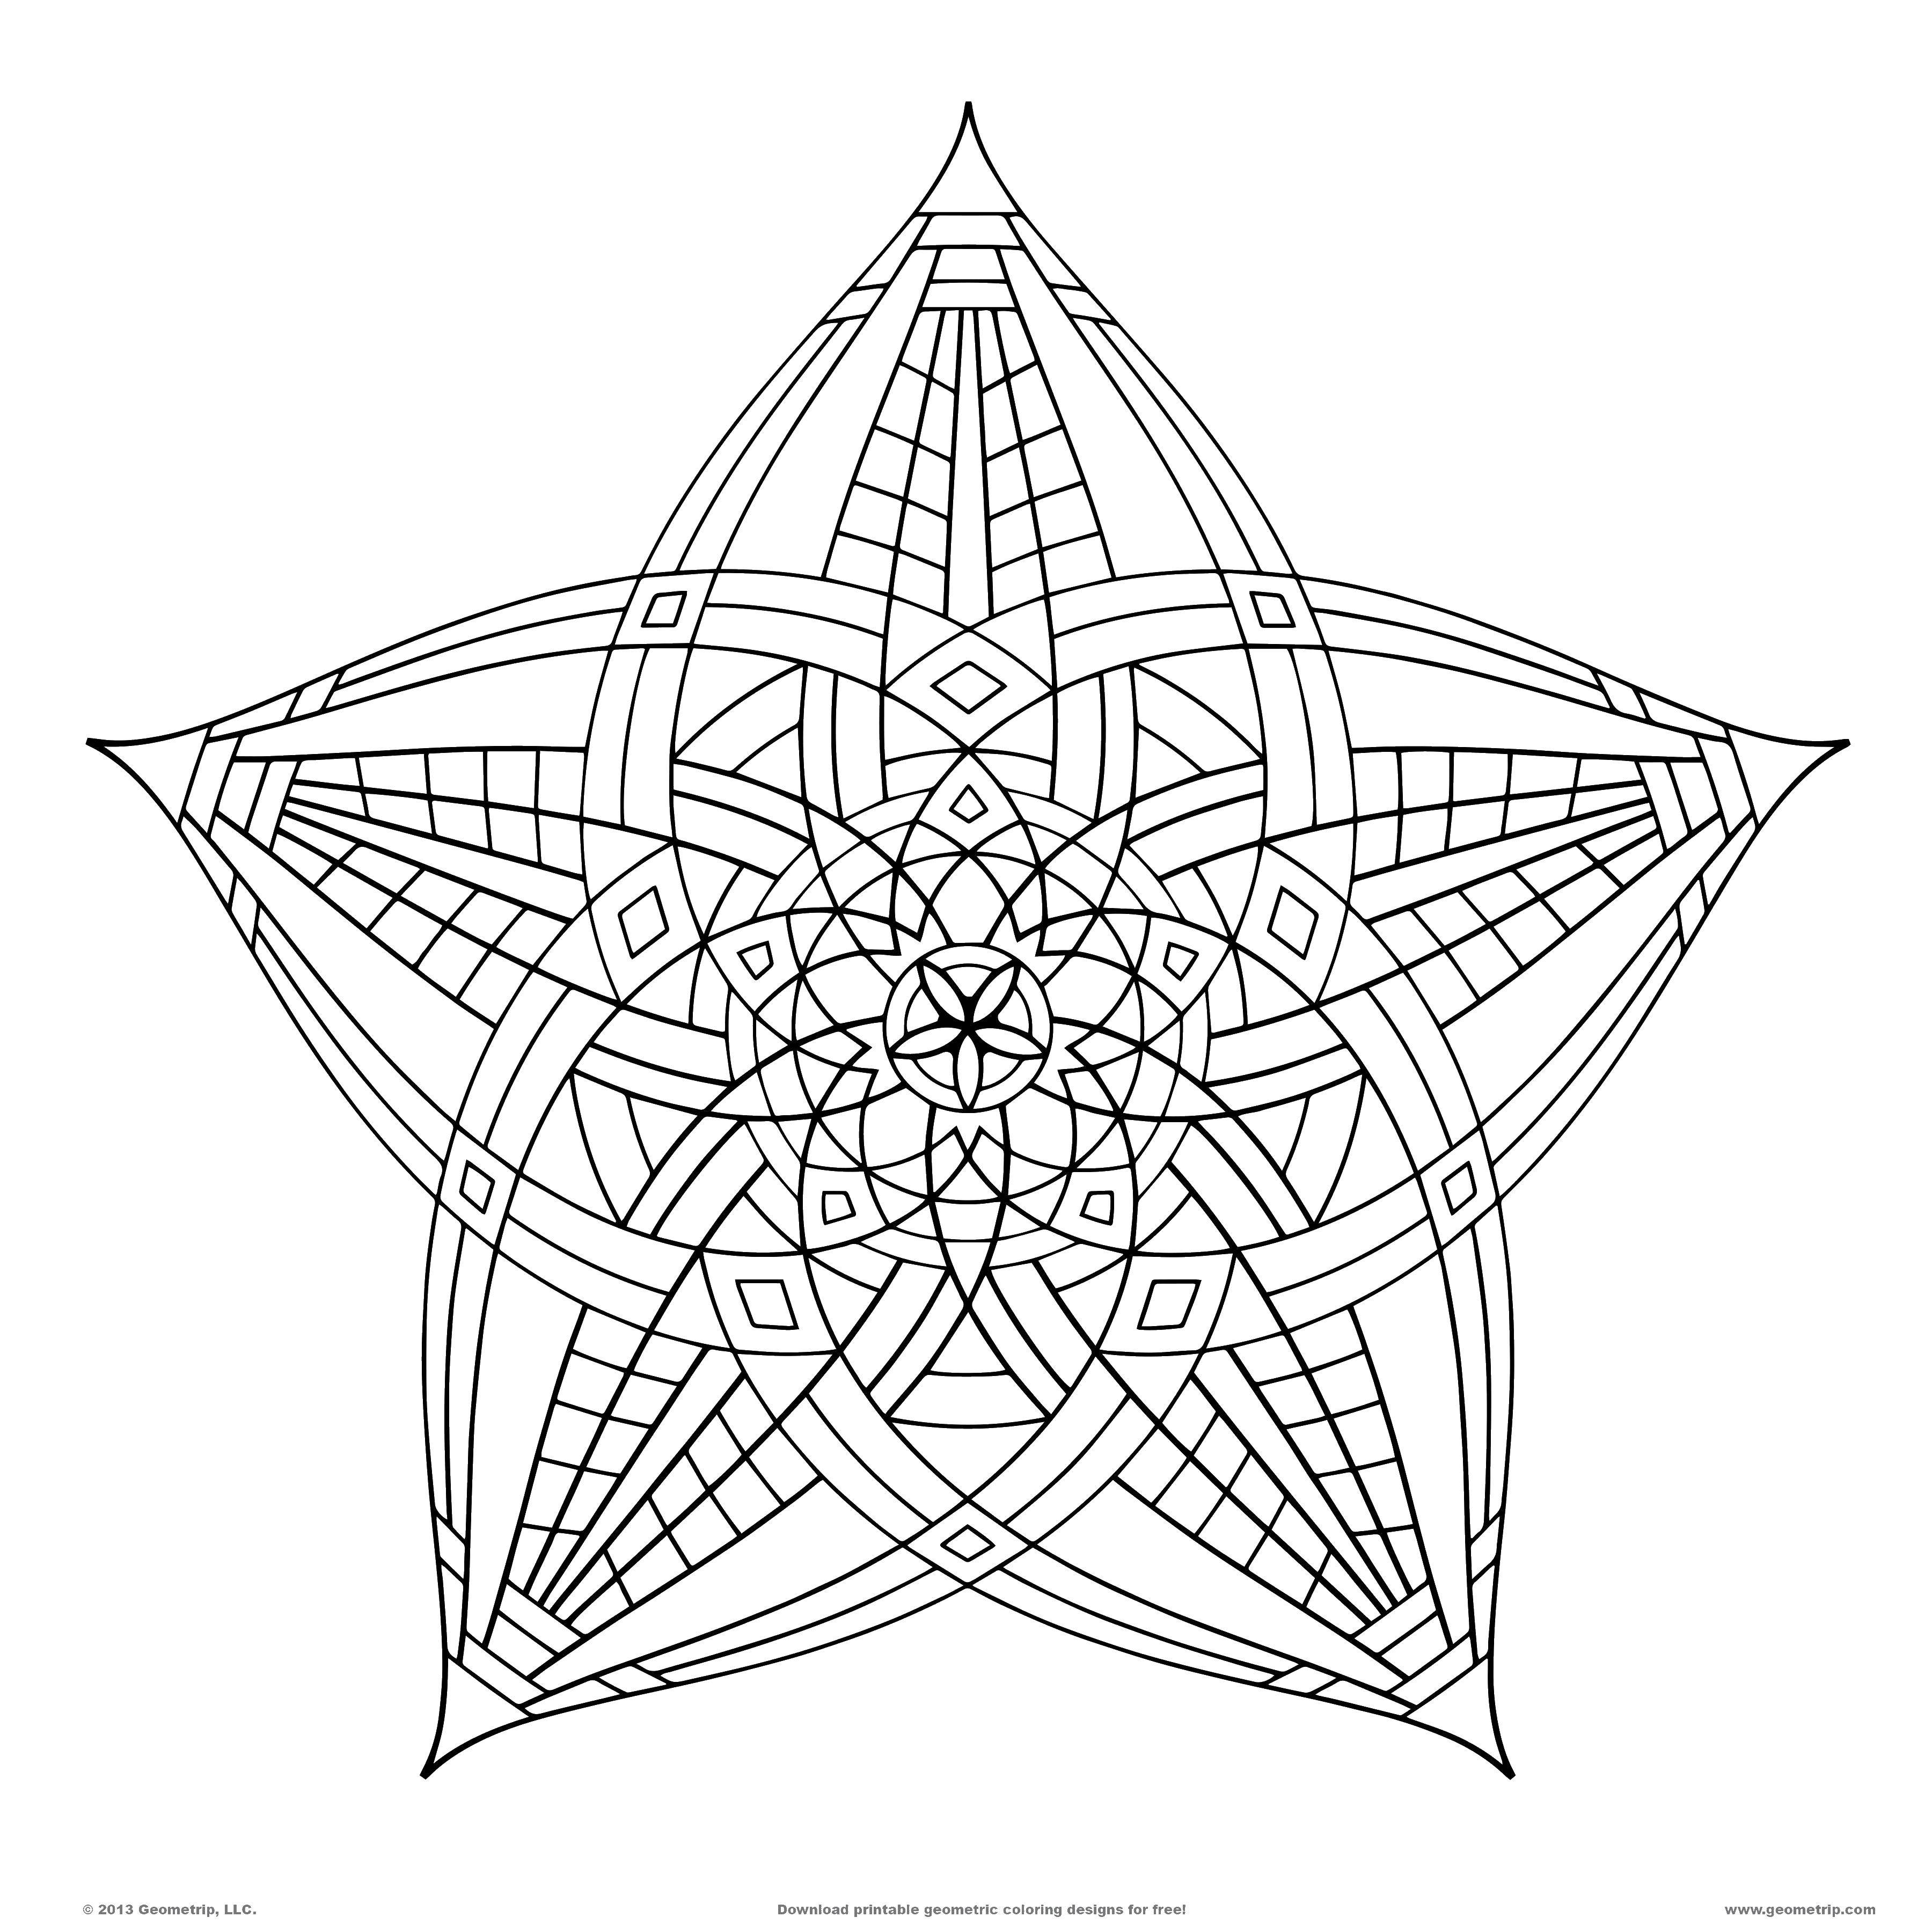 Coloring Star flower. Category Patterns with flowers. Tags:  Patterns, flower.